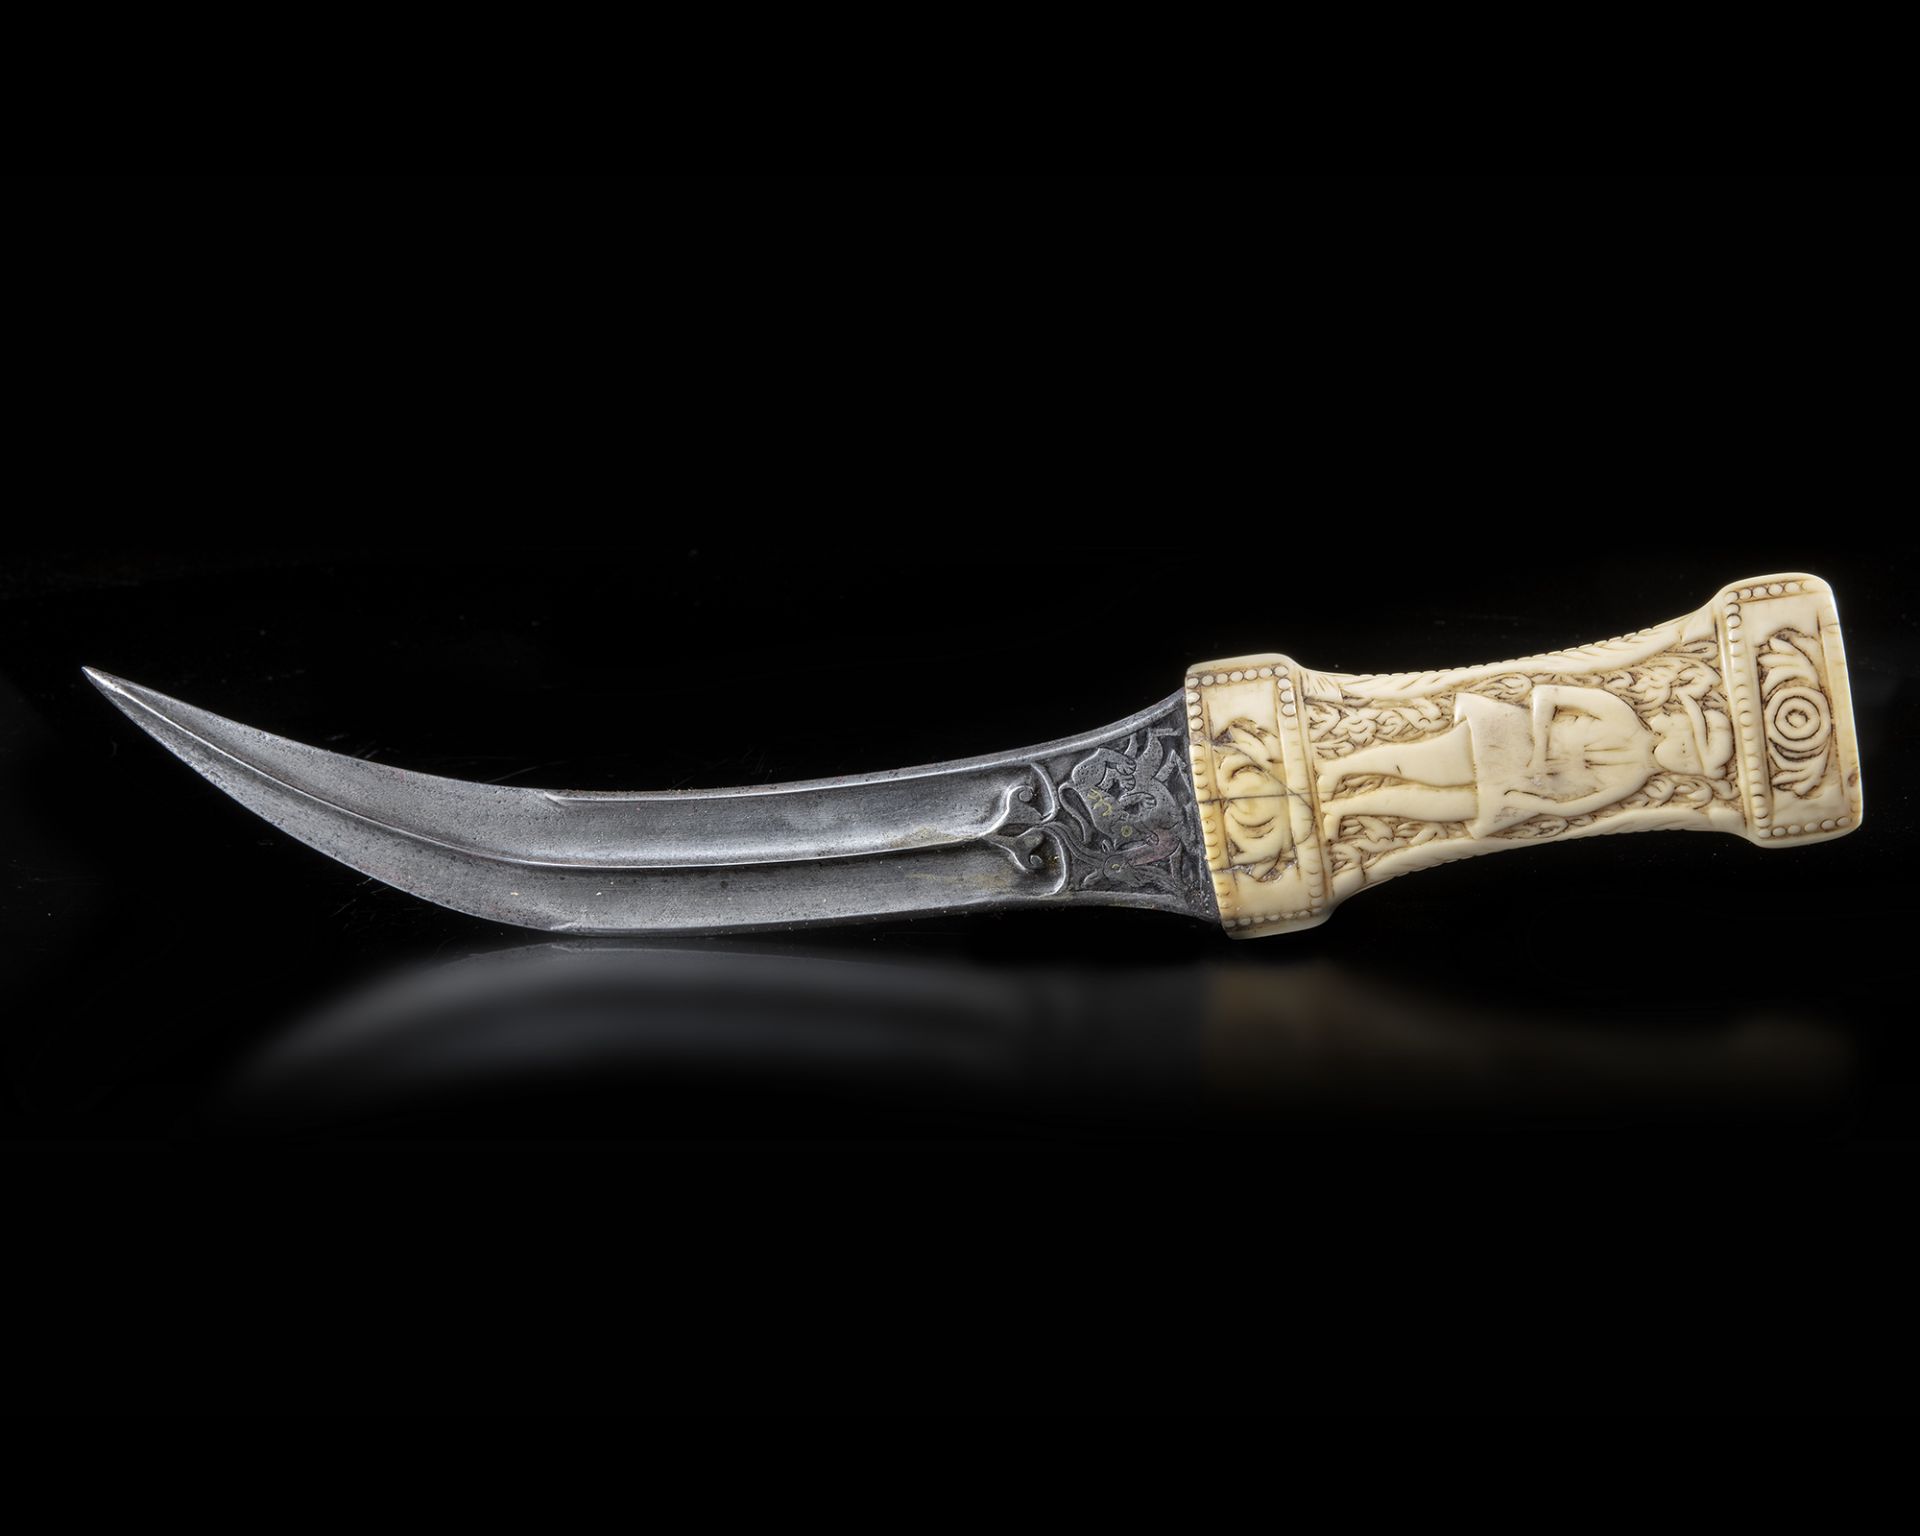 A QAJAR IVORY HILTED DAGGER, PERSIA 19TH CENTURY - Image 2 of 4